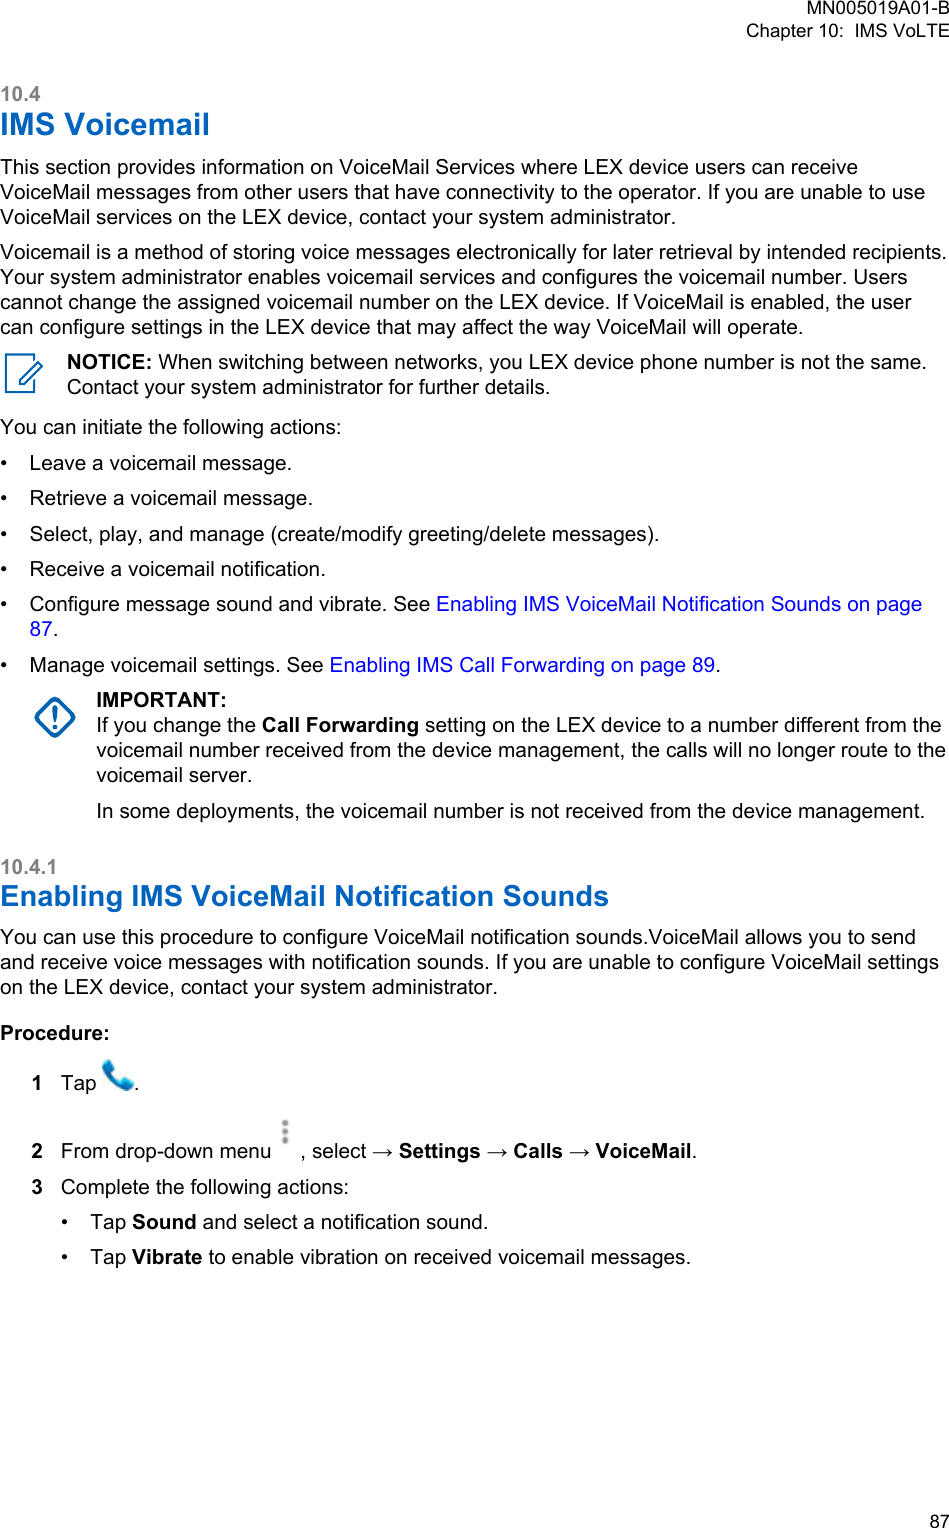 10.4IMS VoicemailThis section provides information on VoiceMail Services where LEX device users can receiveVoiceMail messages from other users that have connectivity to the operator. If you are unable to useVoiceMail services on the LEX device, contact your system administrator.Voicemail is a method of storing voice messages electronically for later retrieval by intended recipients.Your system administrator enables voicemail services and configures the voicemail number. Userscannot change the assigned voicemail number on the LEX device. If VoiceMail is enabled, the usercan configure settings in the LEX device that may affect the way VoiceMail will operate.NOTICE: When switching between networks, you LEX device phone number is not the same.Contact your system administrator for further details.You can initiate the following actions:•Leave a voicemail message.• Retrieve a voicemail message.• Select, play, and manage (create/modify greeting/delete messages).• Receive a voicemail notification.• Configure message sound and vibrate. See Enabling IMS VoiceMail Notification Sounds on page87.• Manage voicemail settings. See Enabling IMS Call Forwarding on page 89.IMPORTANT:If you change the Call Forwarding setting on the LEX device to a number different from thevoicemail number received from the device management, the calls will no longer route to thevoicemail server.In some deployments, the voicemail number is not received from the device management.10.4.1Enabling IMS VoiceMail Notification Sounds You can use this procedure to configure VoiceMail notification sounds.VoiceMail allows you to sendand receive voice messages with notification sounds. If you are unable to configure VoiceMail settingson the LEX device, contact your system administrator.Procedure:1Tap  .2From drop-down menu , select → Settings → Calls → VoiceMail.3Complete the following actions:•Tap Sound and select a notification sound.• Tap Vibrate to enable vibration on received voicemail messages.MN005019A01-BChapter 10:  IMS VoLTE  87